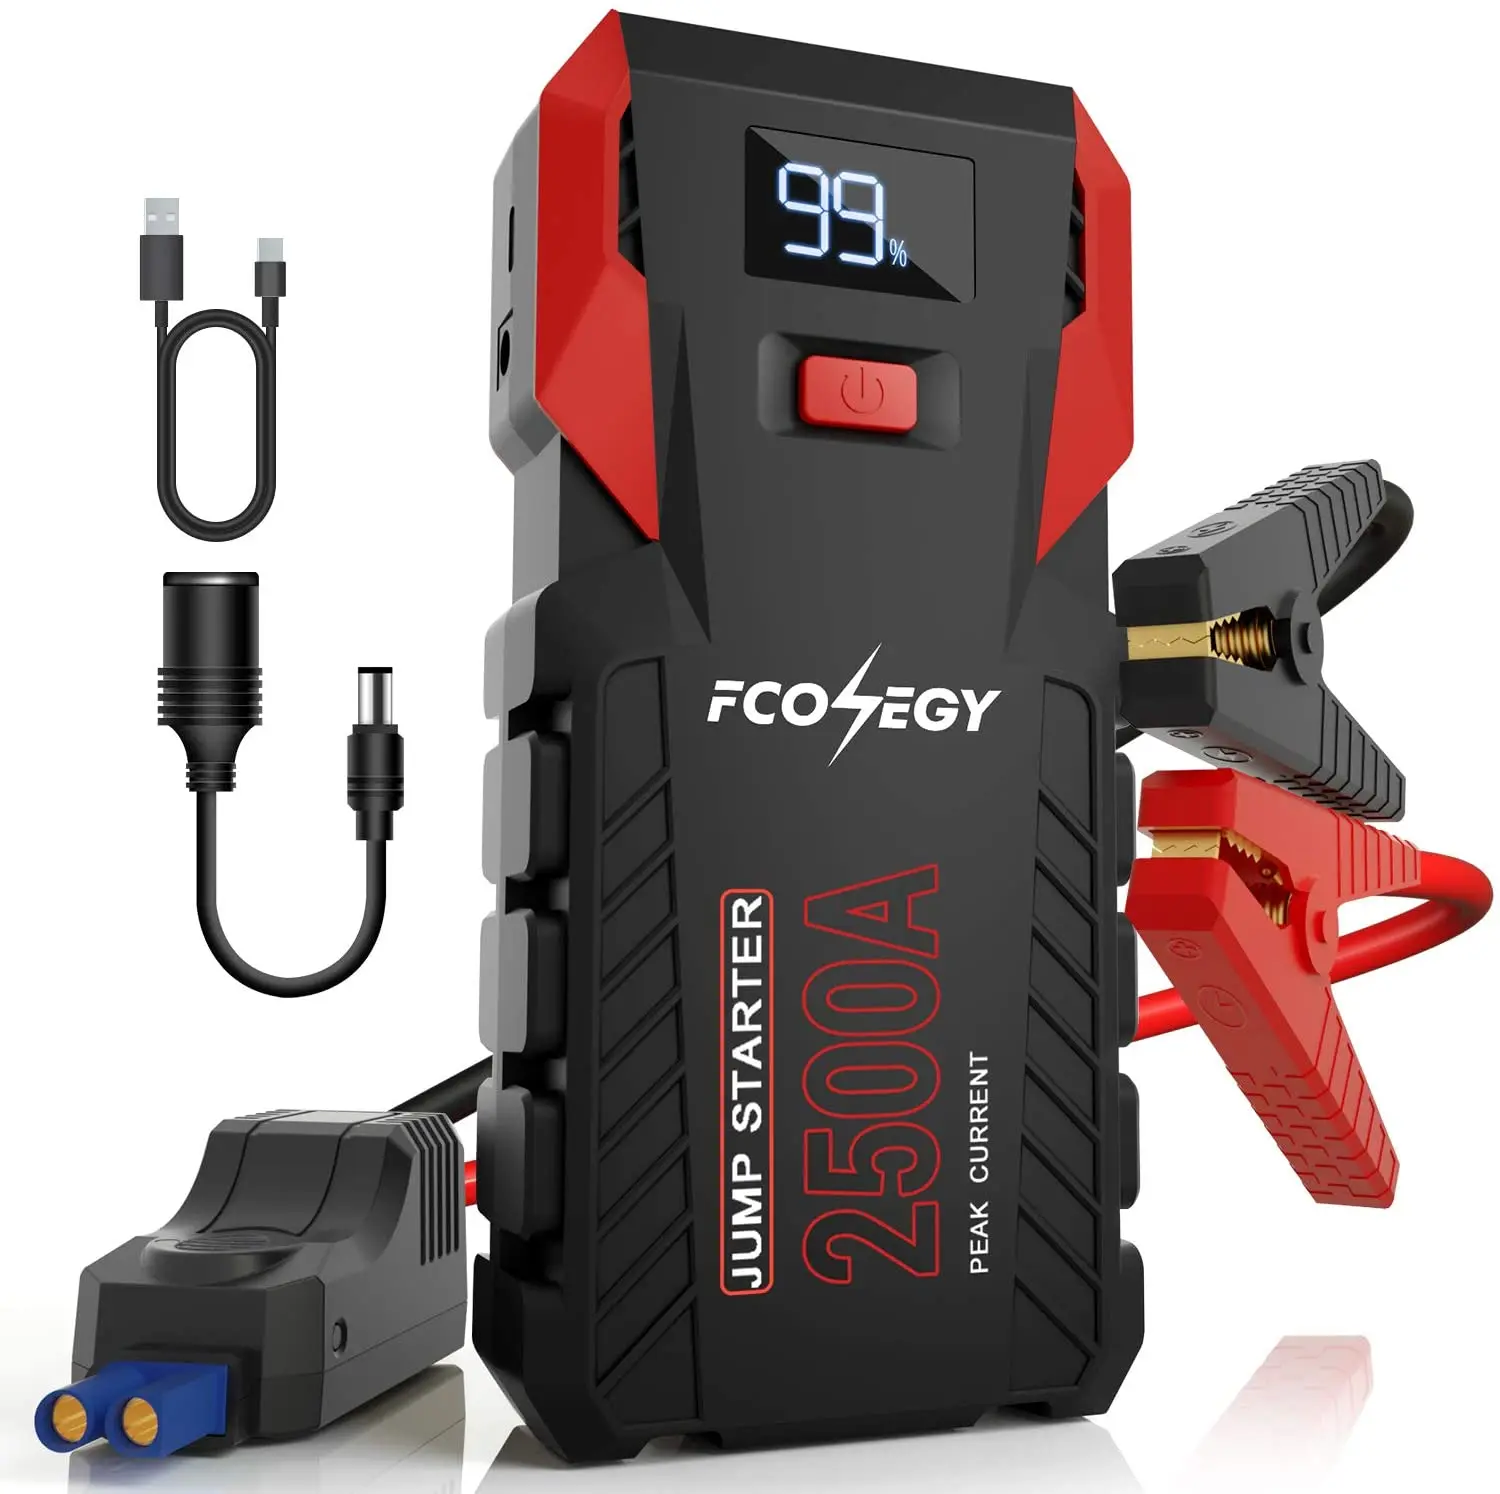 Multi-functional Best Portable Auto Battery Booster 2600mah Car Jump Starter  With Quick Charge Port 12v - Buy Portable Car Battery Jump Starter Battery  Box,Portable Car Battery Jump Starter Car Battery,Battery Charger Automotive